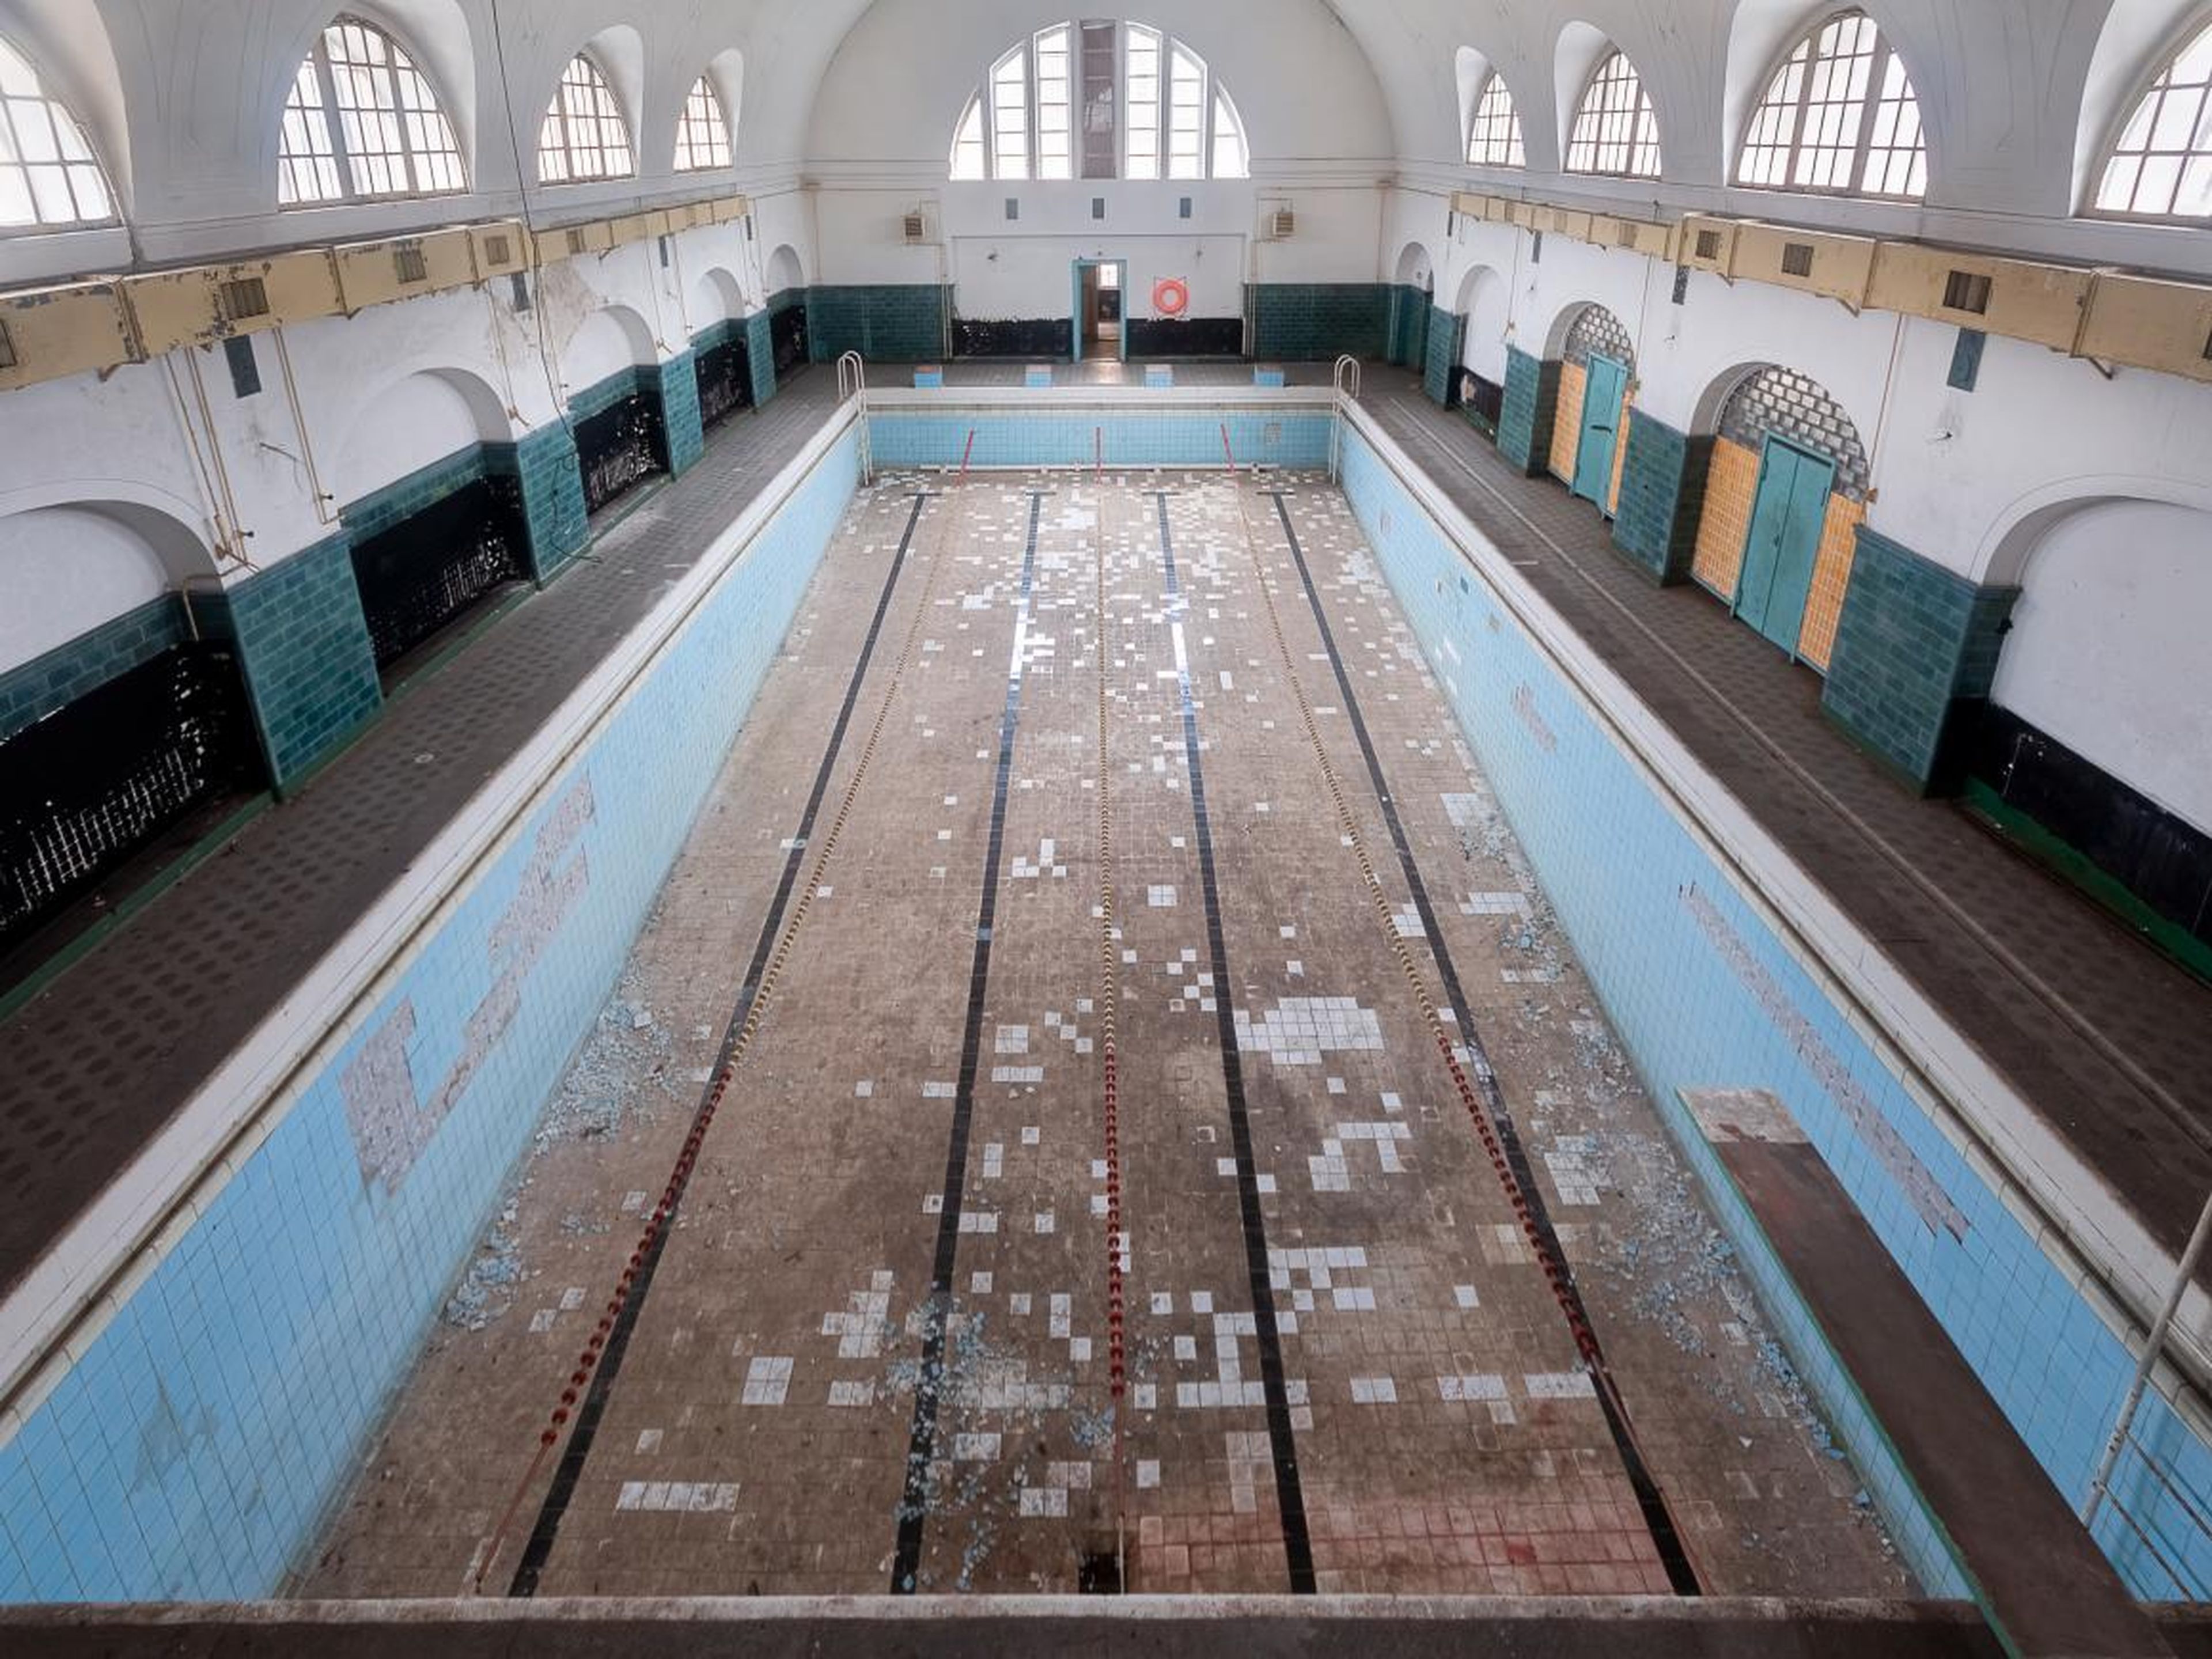 The swimming pool, completely empty of water, has remained frozen in time. You can see the lane dividers still hanging mid-air.